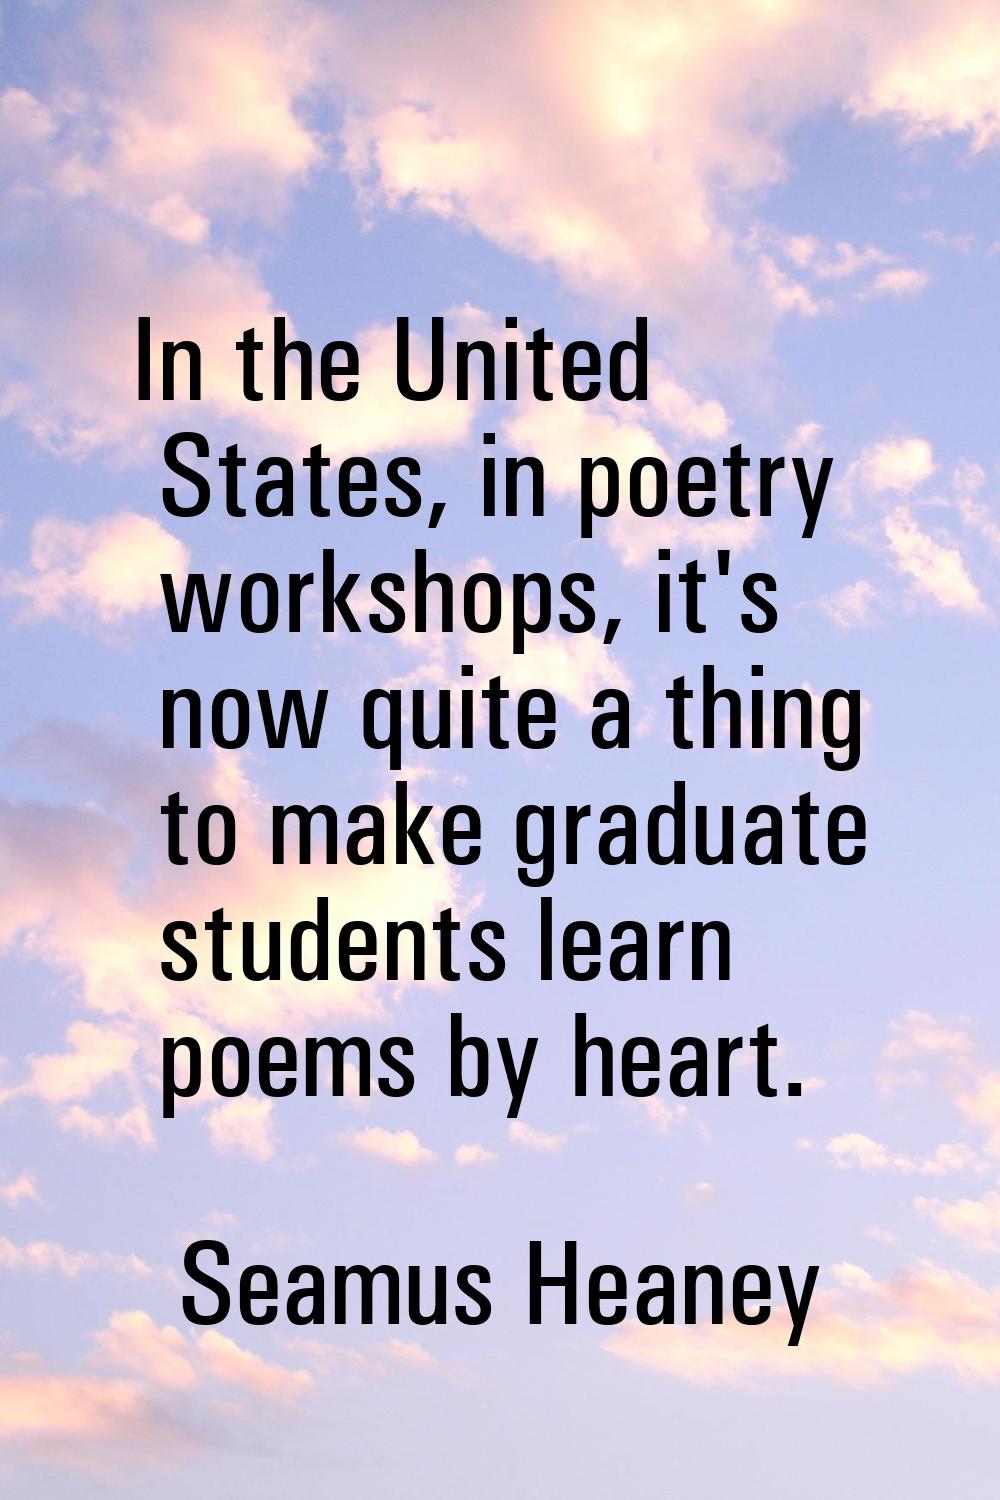 In the United States, in poetry workshops, it's now quite a thing to make graduate students learn p